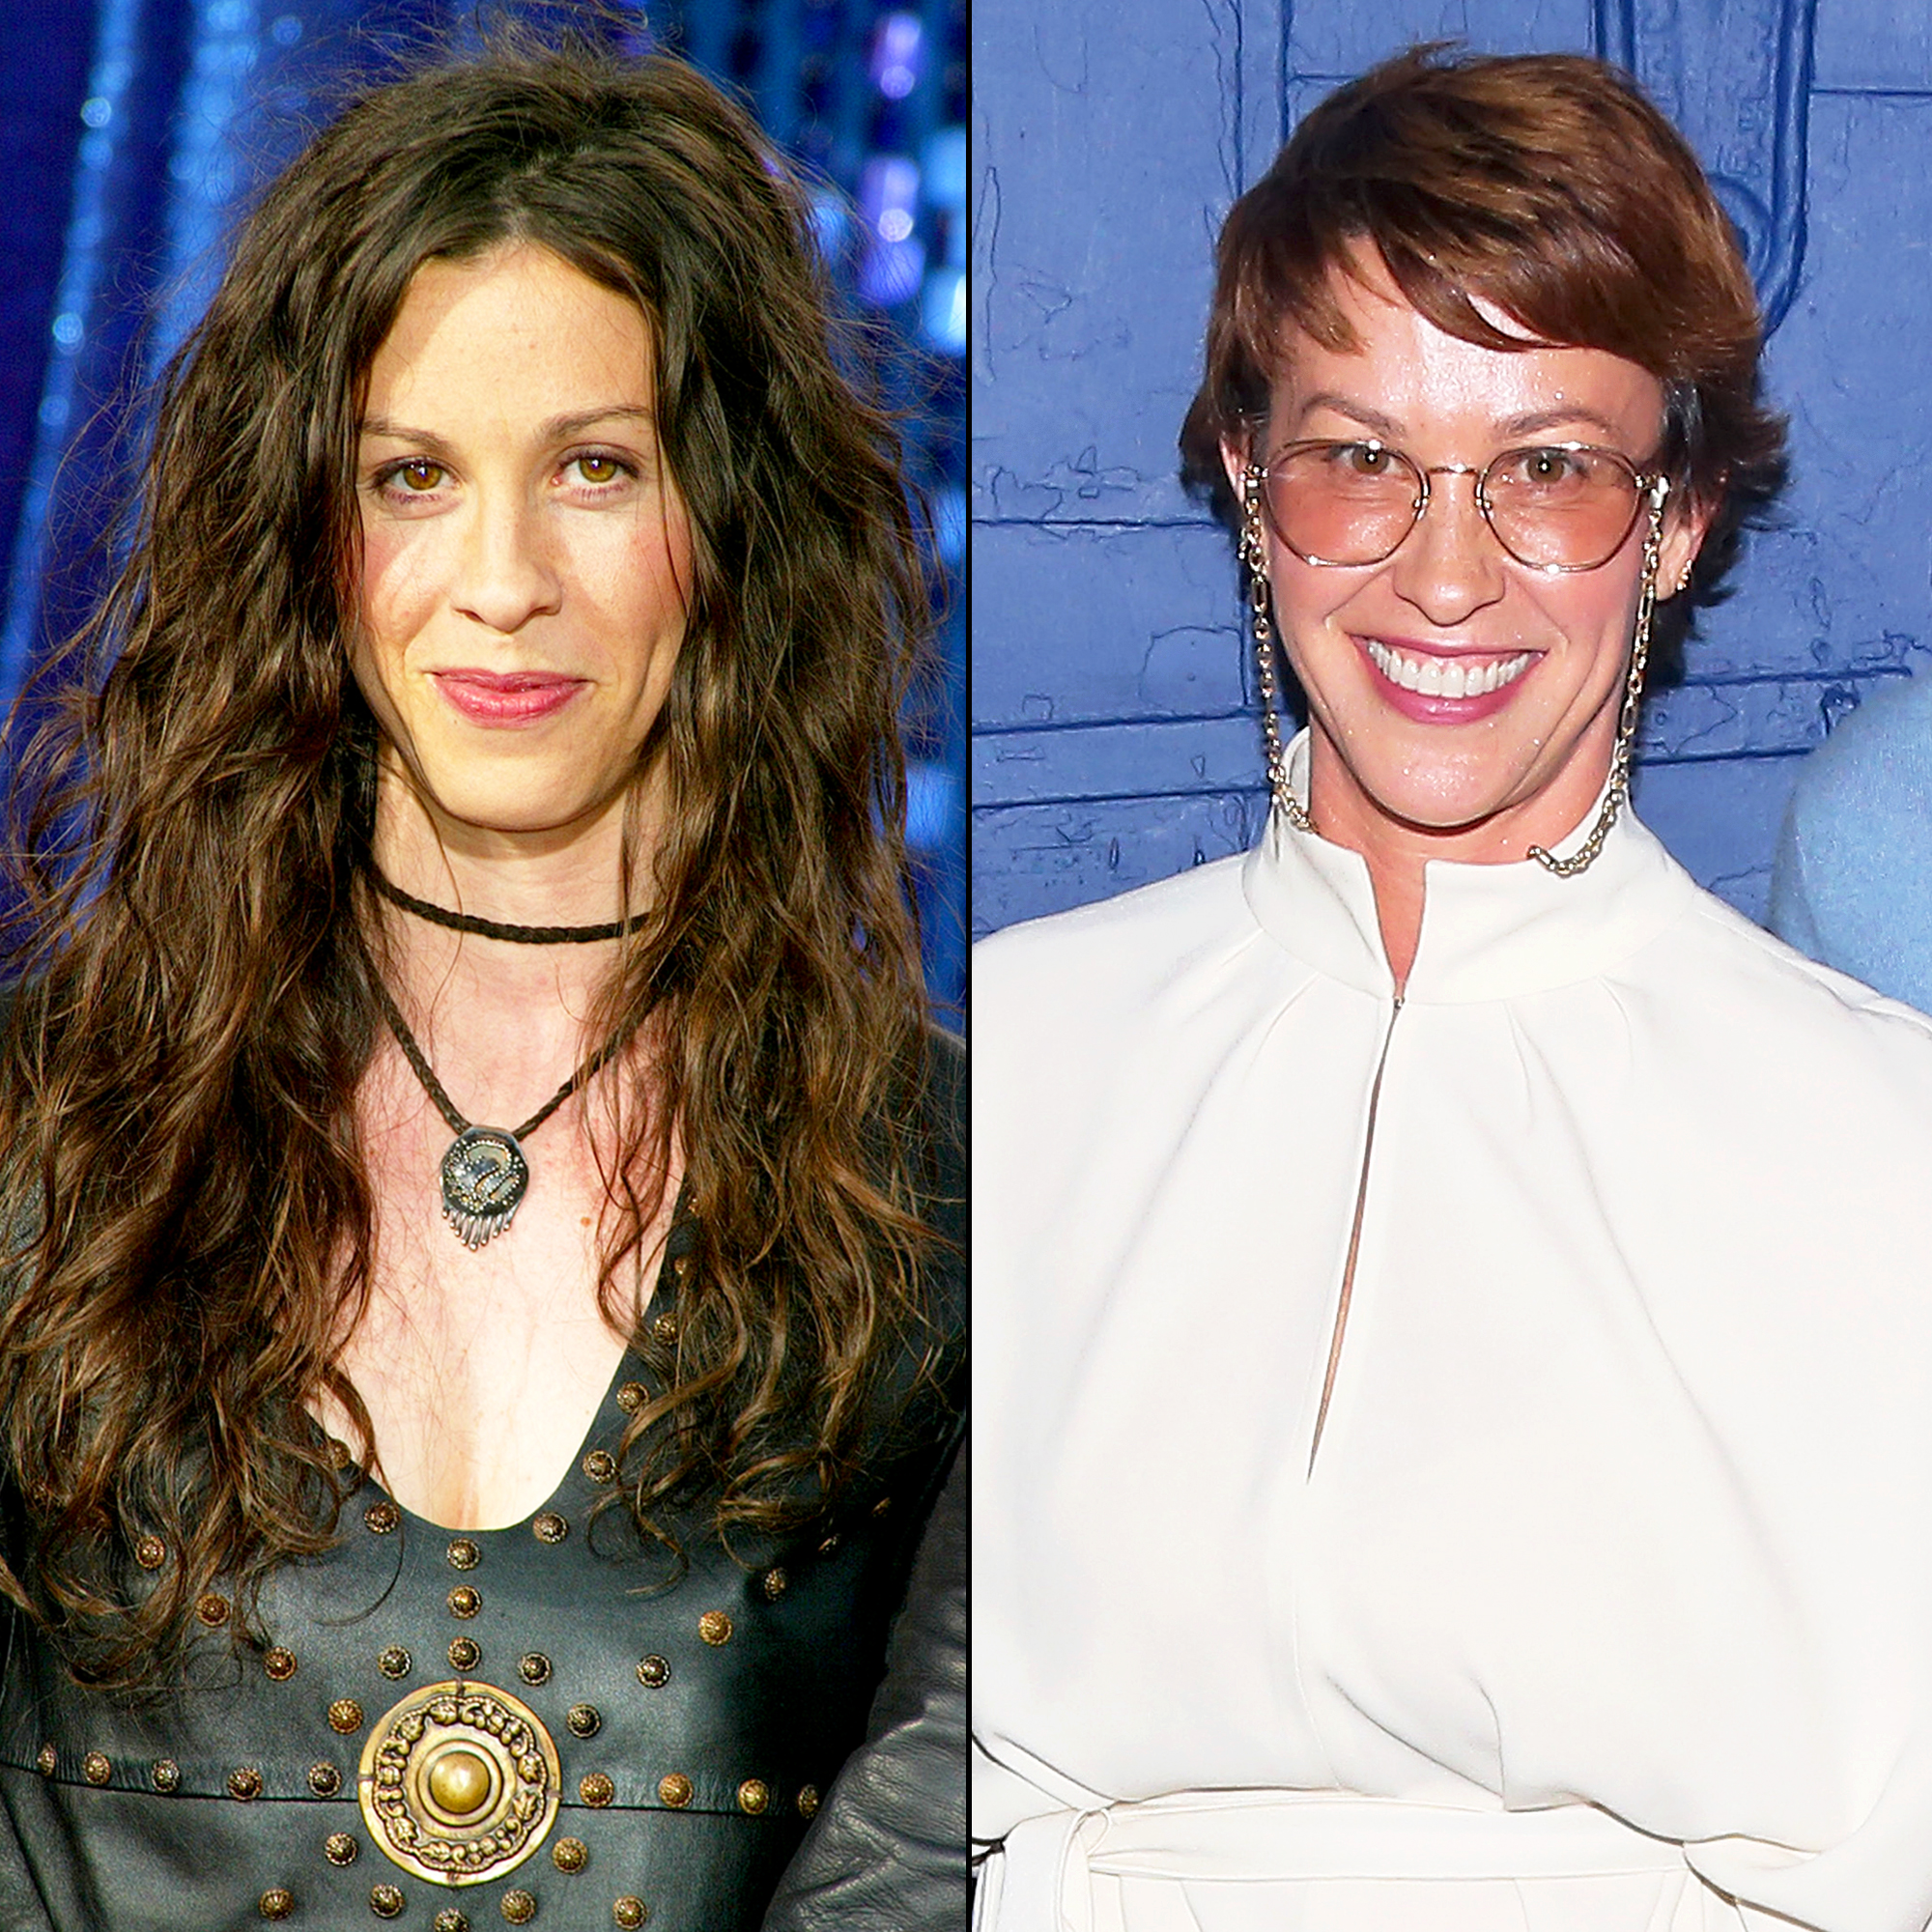 Best Celebrity Hairstyles - Alanis Morissette Haircut.